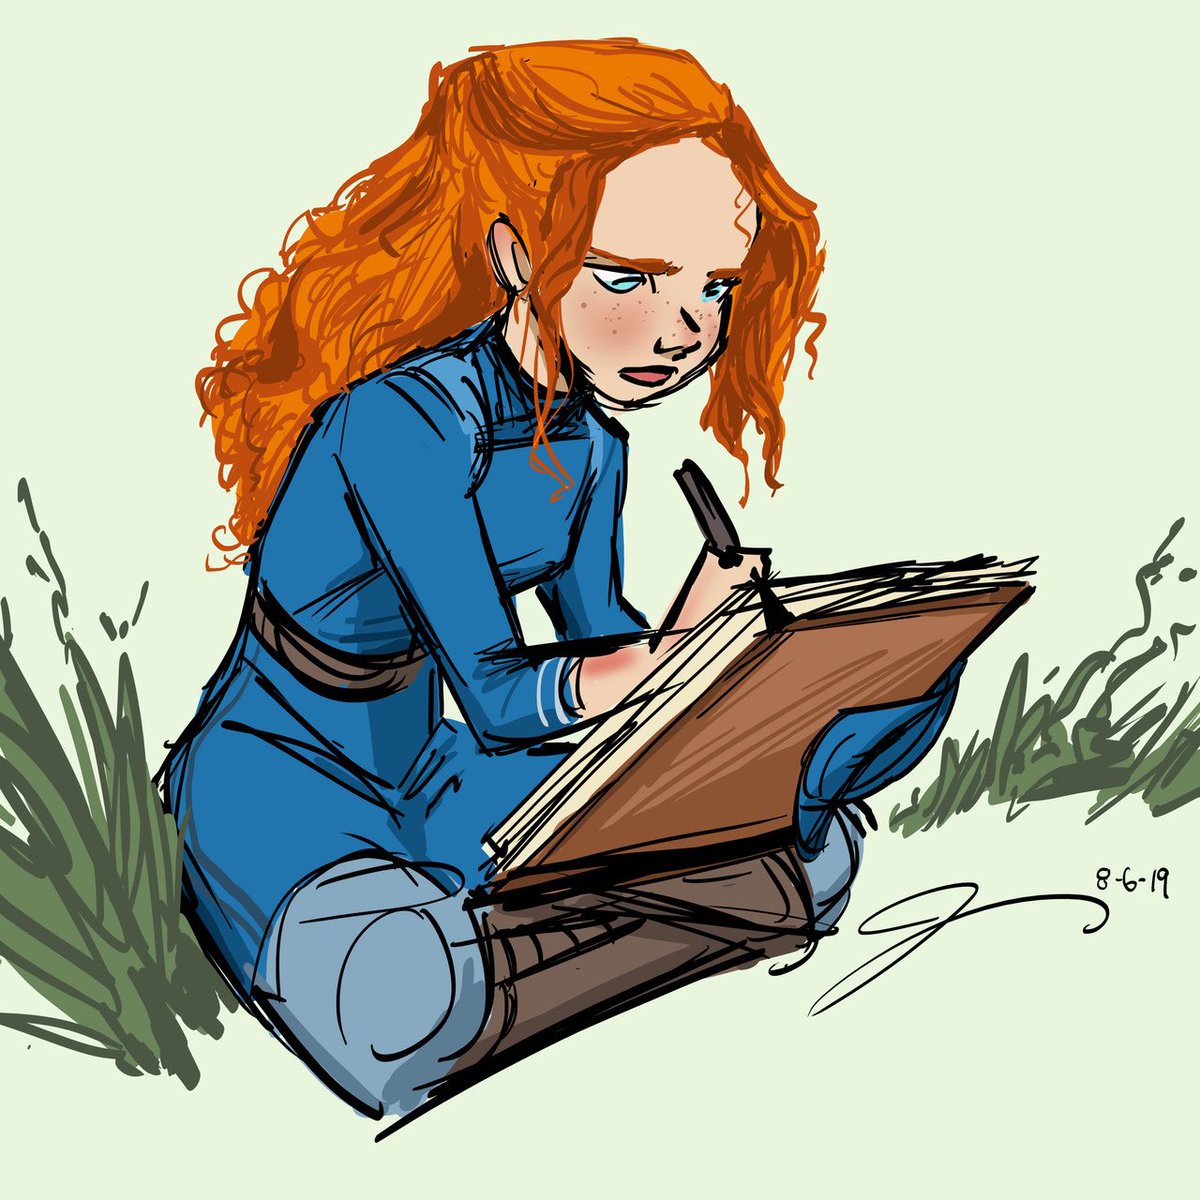 Been listening to the Stormlight Archive on audiobook & I’ve suddenly become a fanatic! Here is fan art featuring Shallan . #thewayofkings #shallandavar #radiant #stormlightarchive #brandonsanderson #wordsofradiance #oathbringer #cosmere #sketch #redhead #shatteredplains